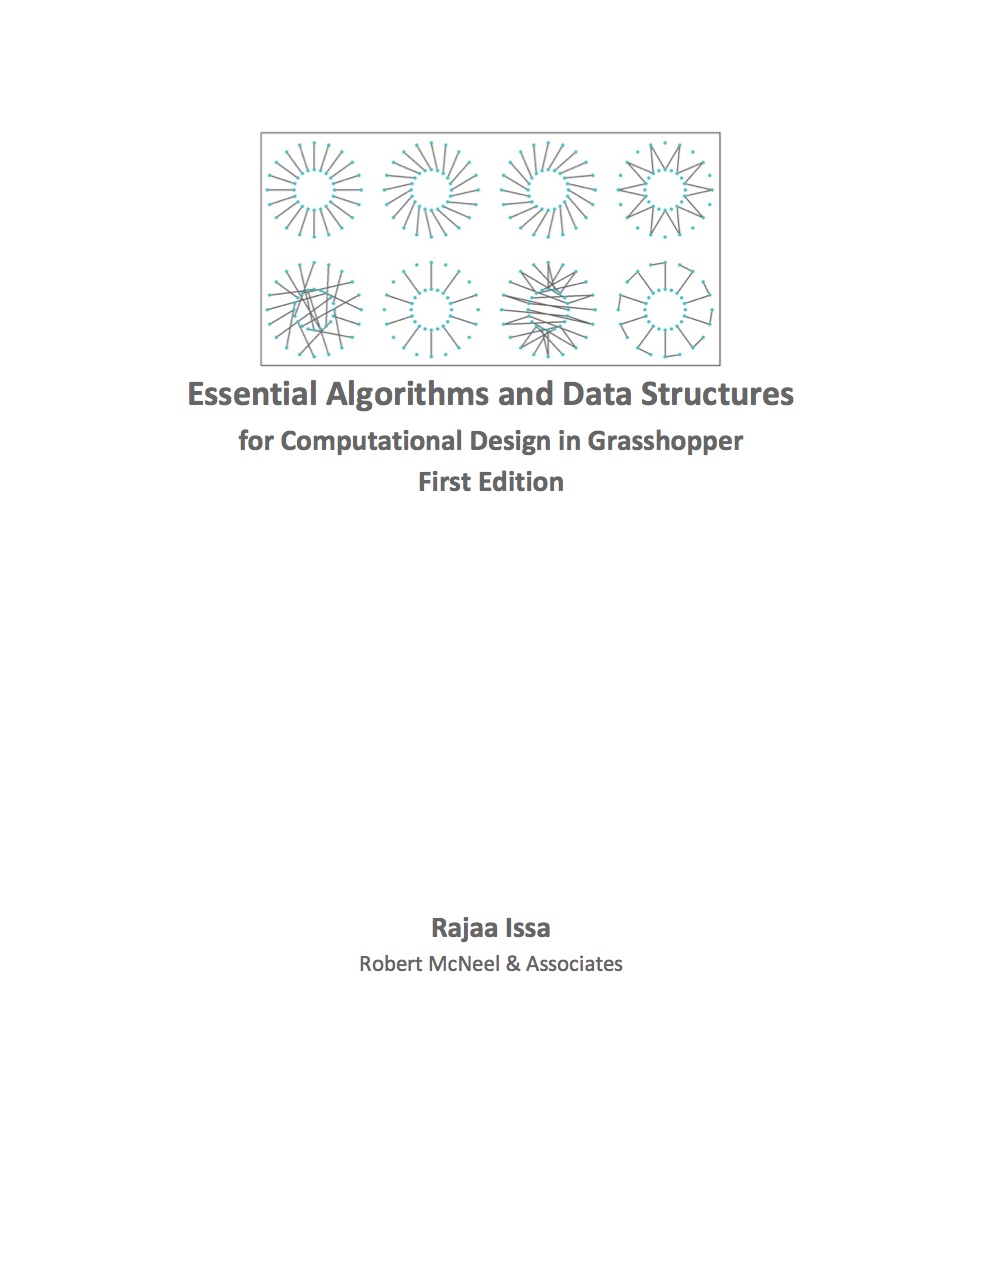 aad algorithms-aided design pdf free download